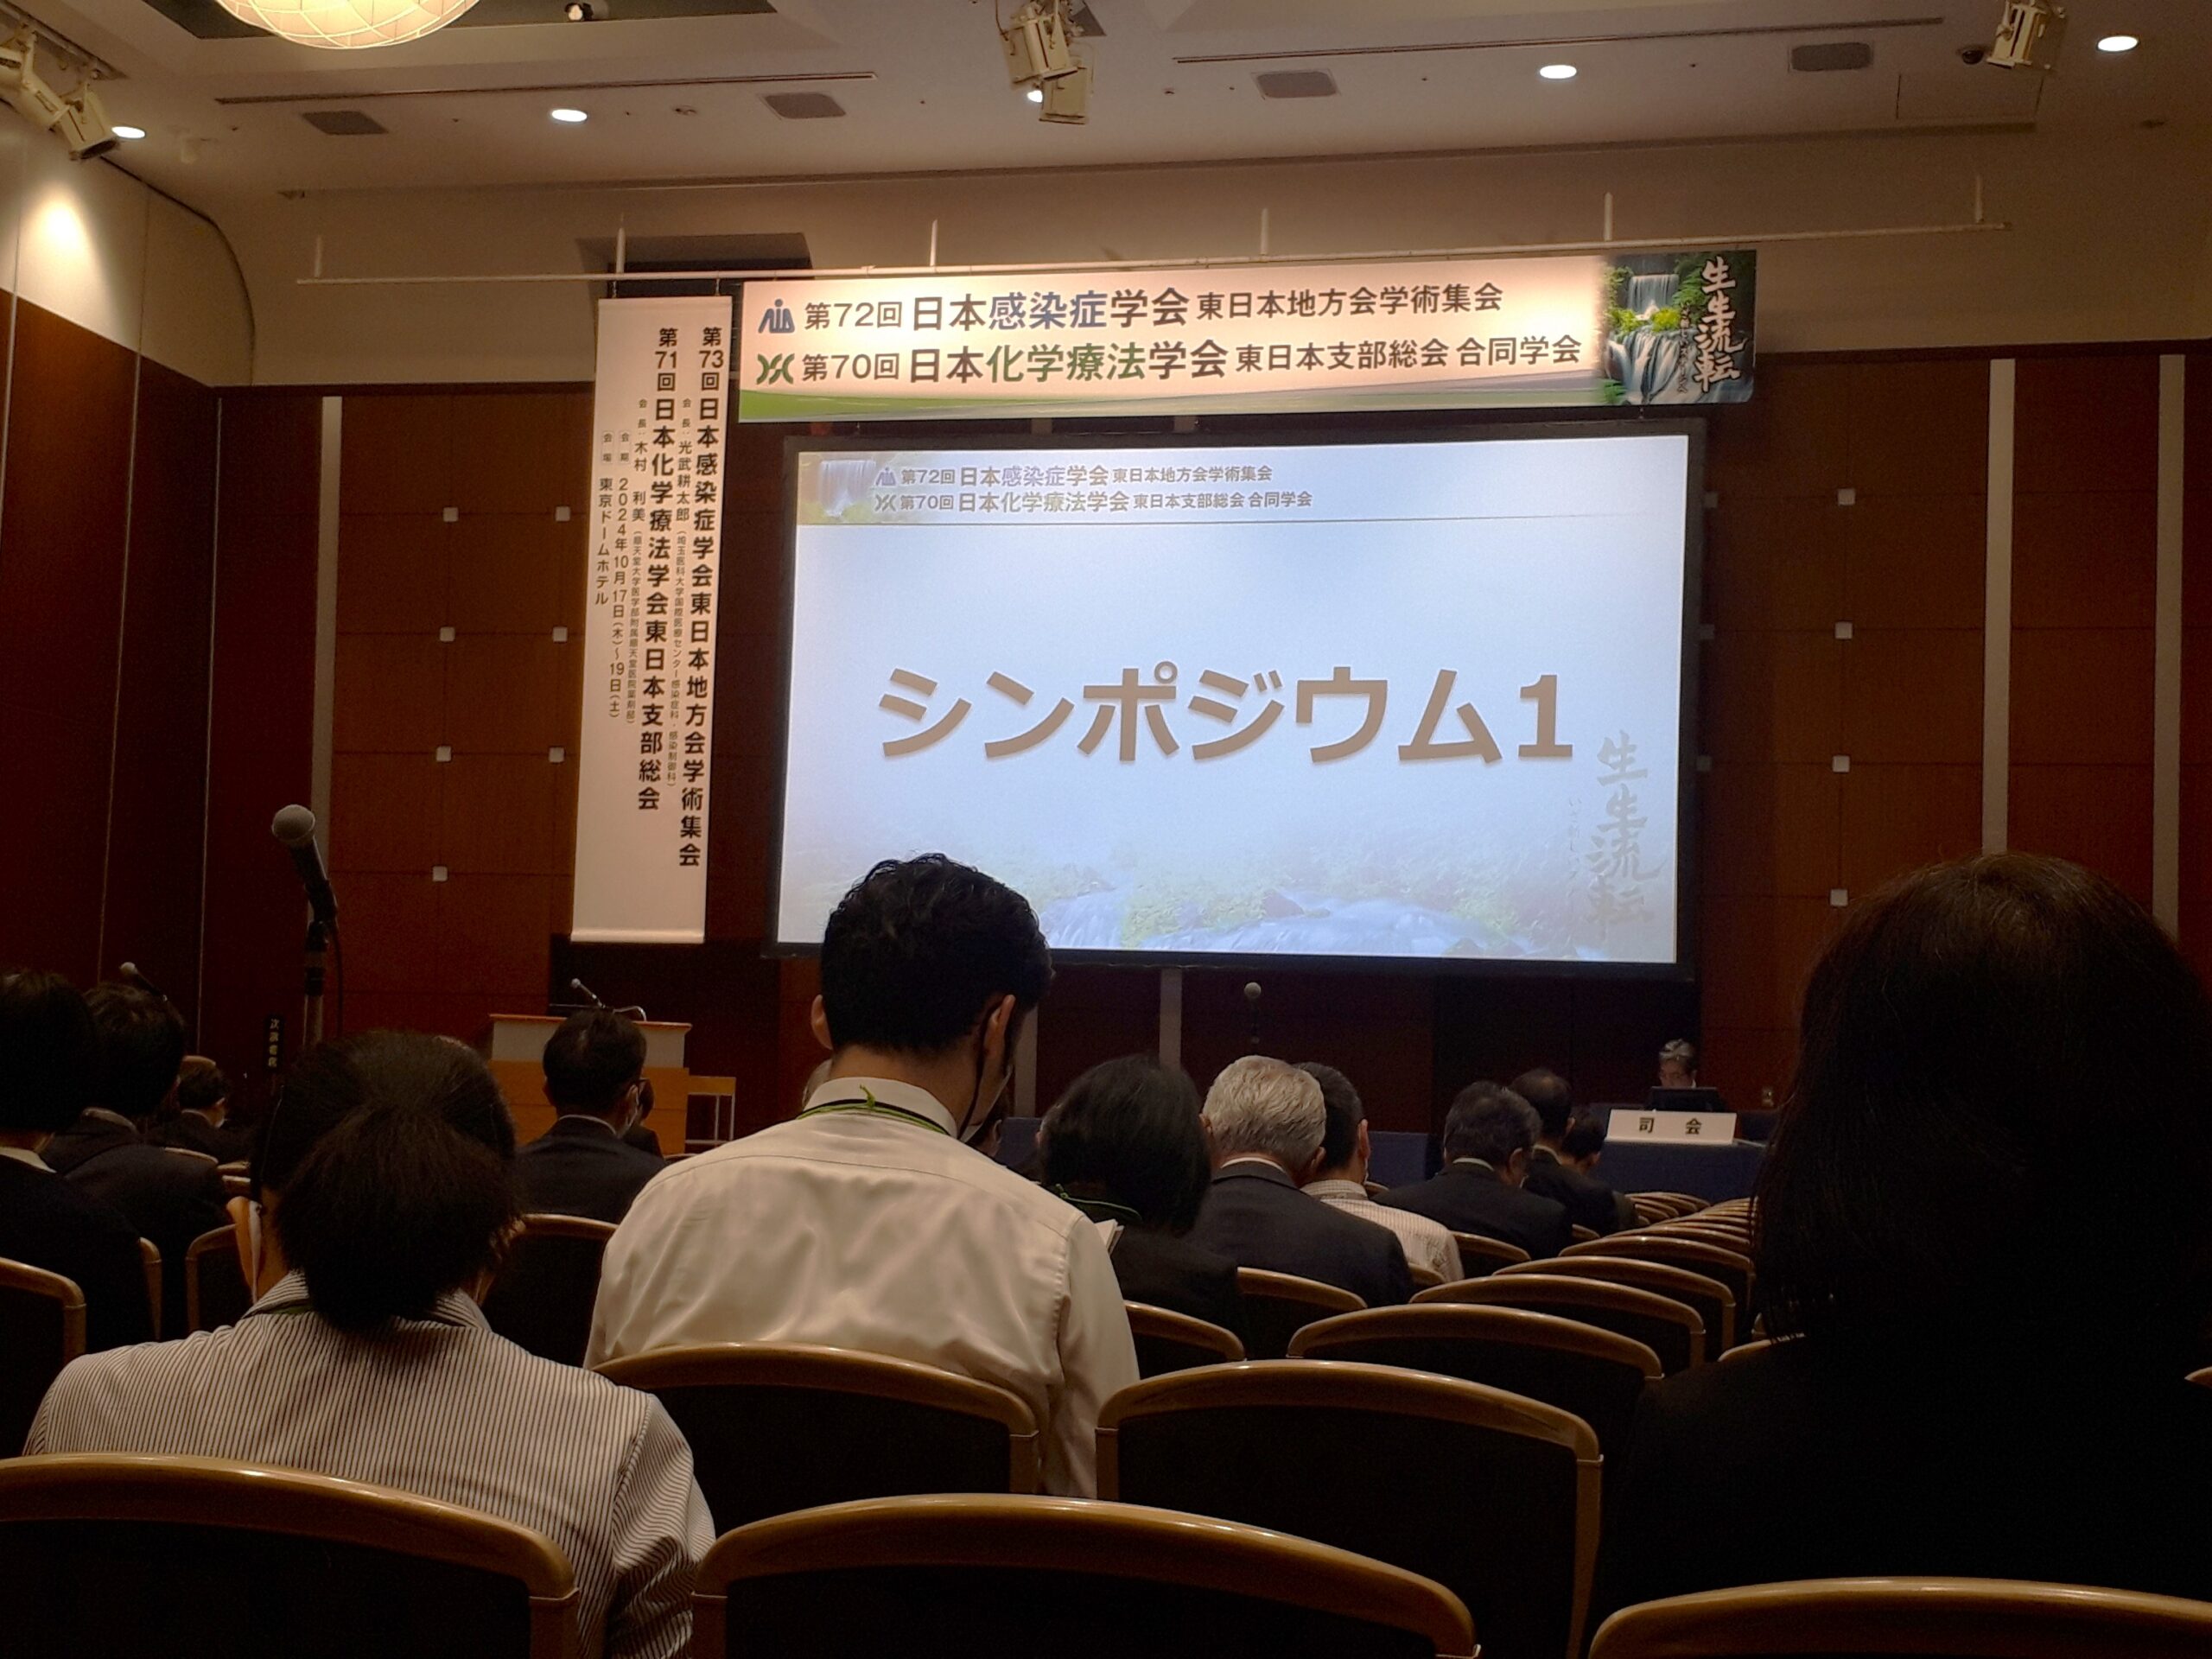 [Event Report] Joint meeting of the 72nd East Japan Regional Meeting of the Japanese Society of Infectious Diseases and the 70th East Japan Branch Meeting of the Japanese Society of Chemotherapy Symposium “Actions against AMR and New AMR National Action Plan 2023-2027” (October 25, 2023)